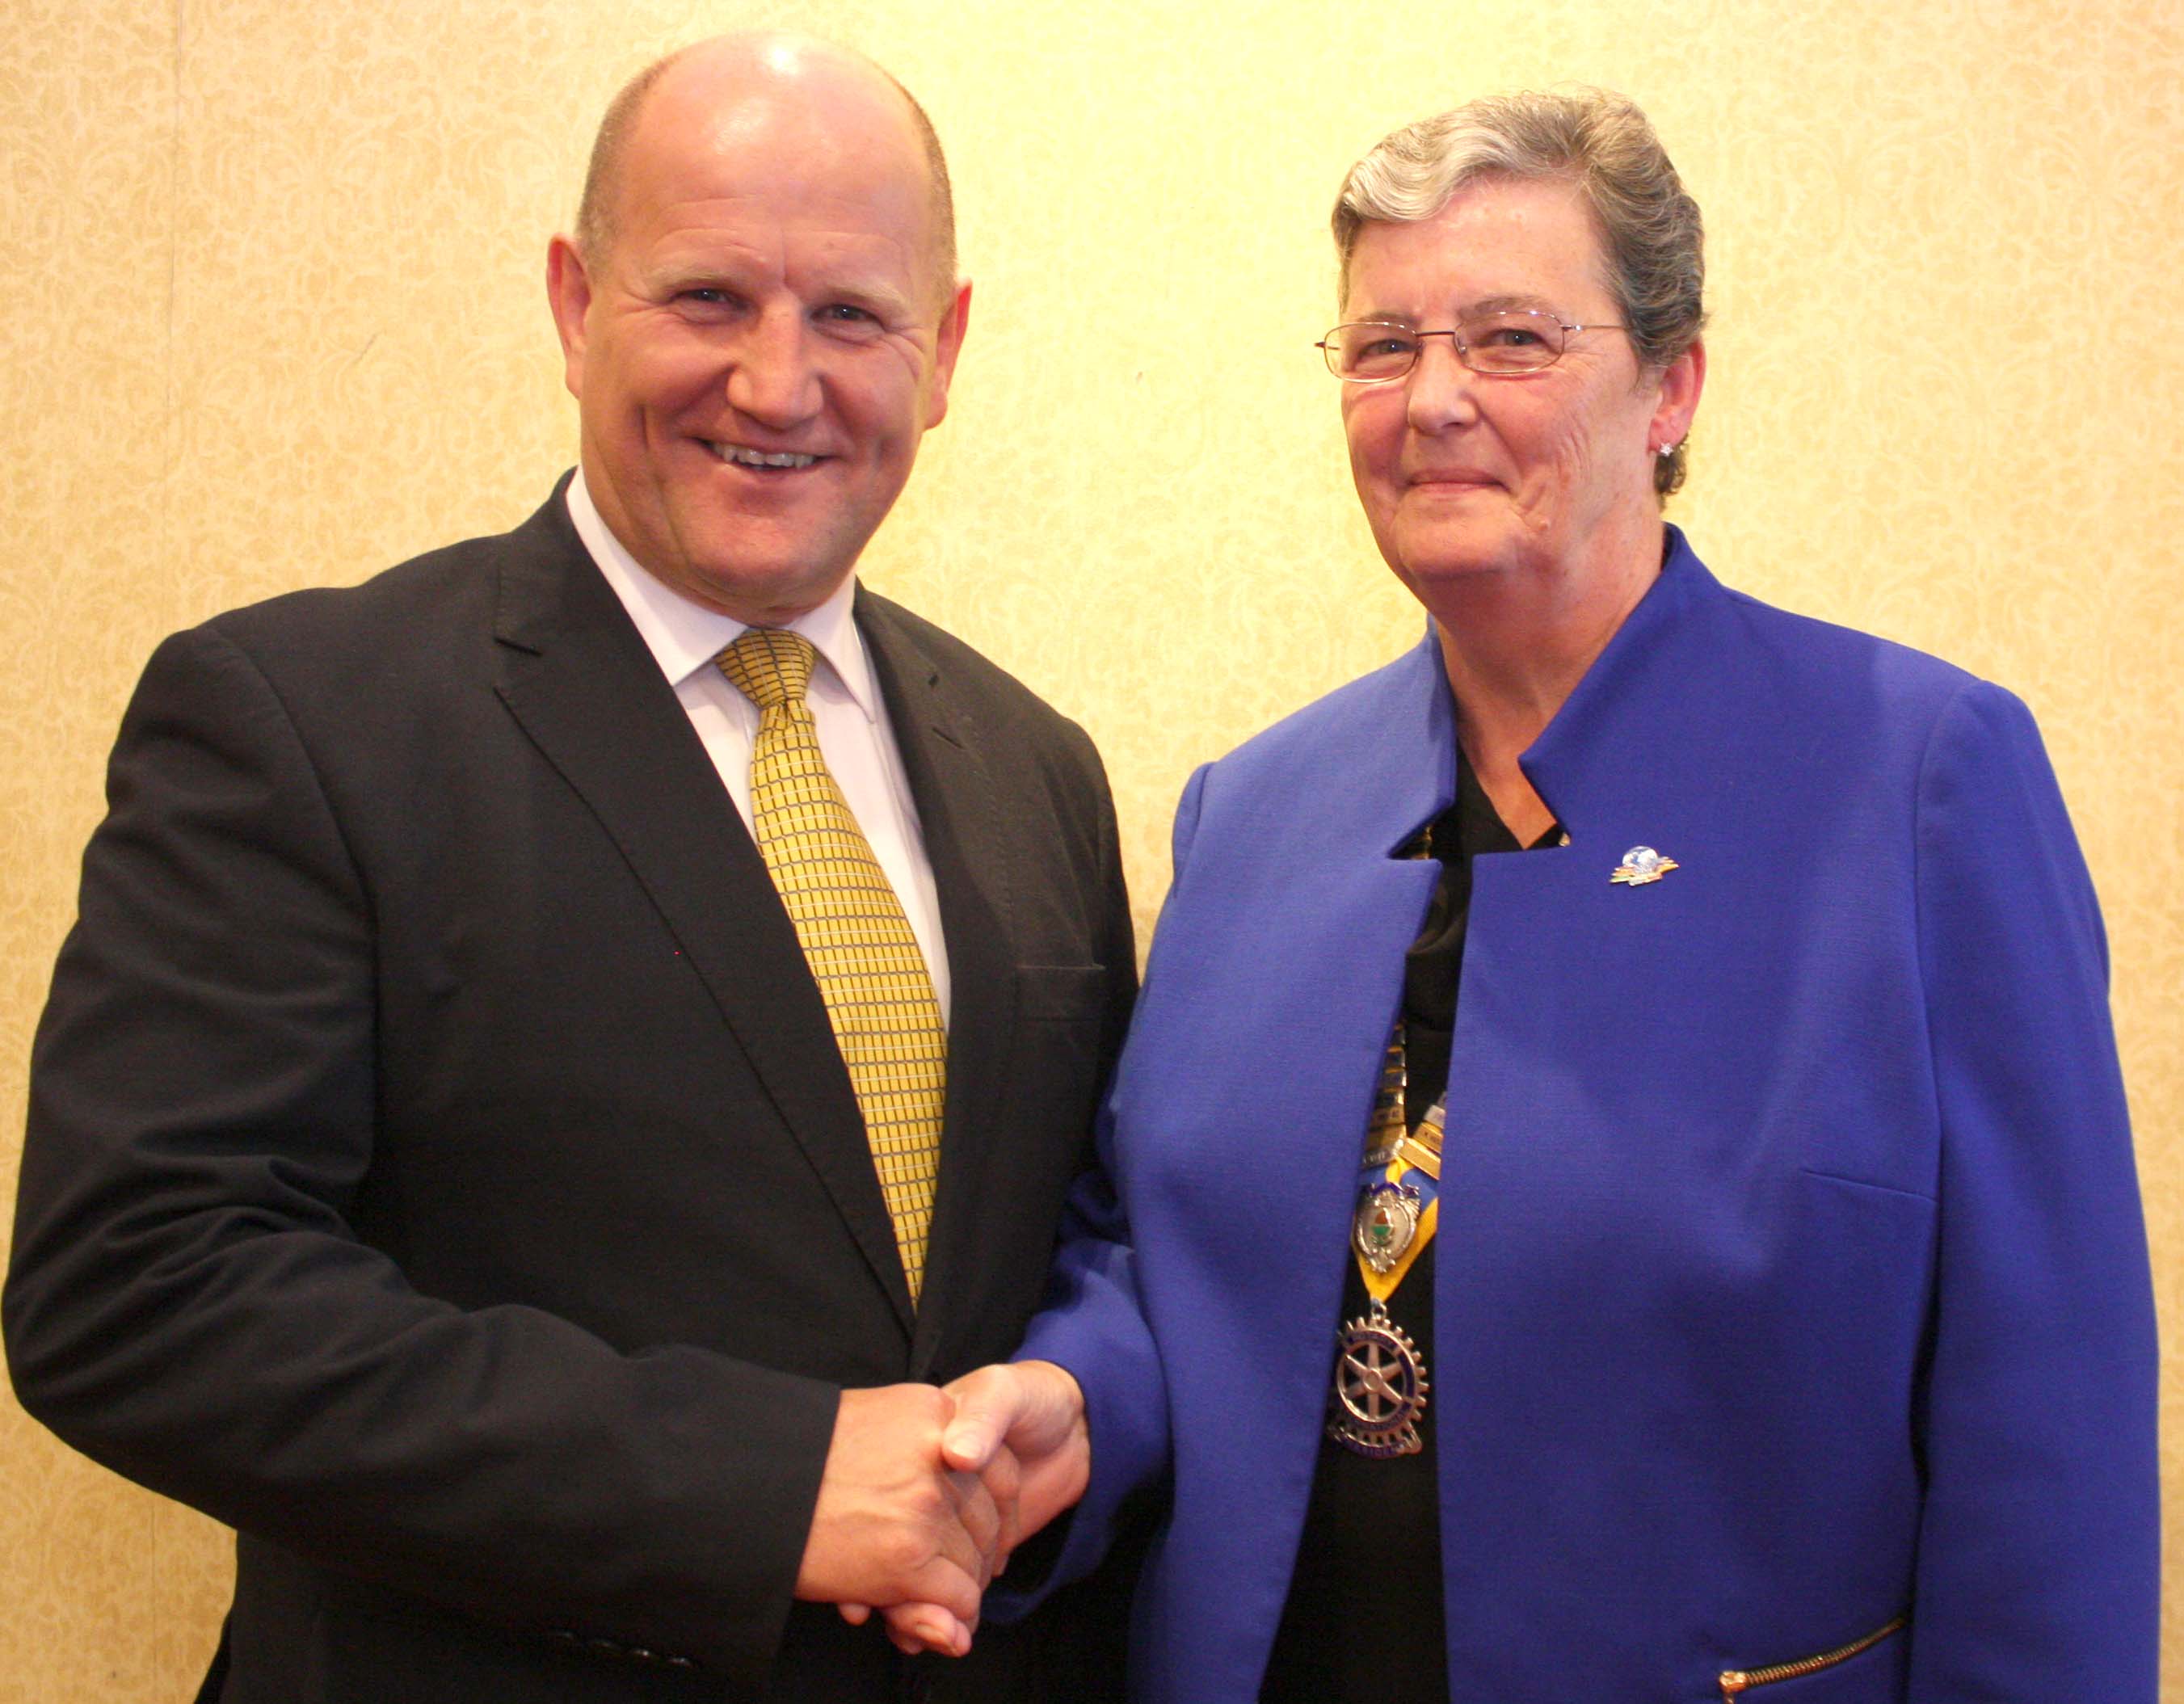 Chief Constable Talks to Rotary Club